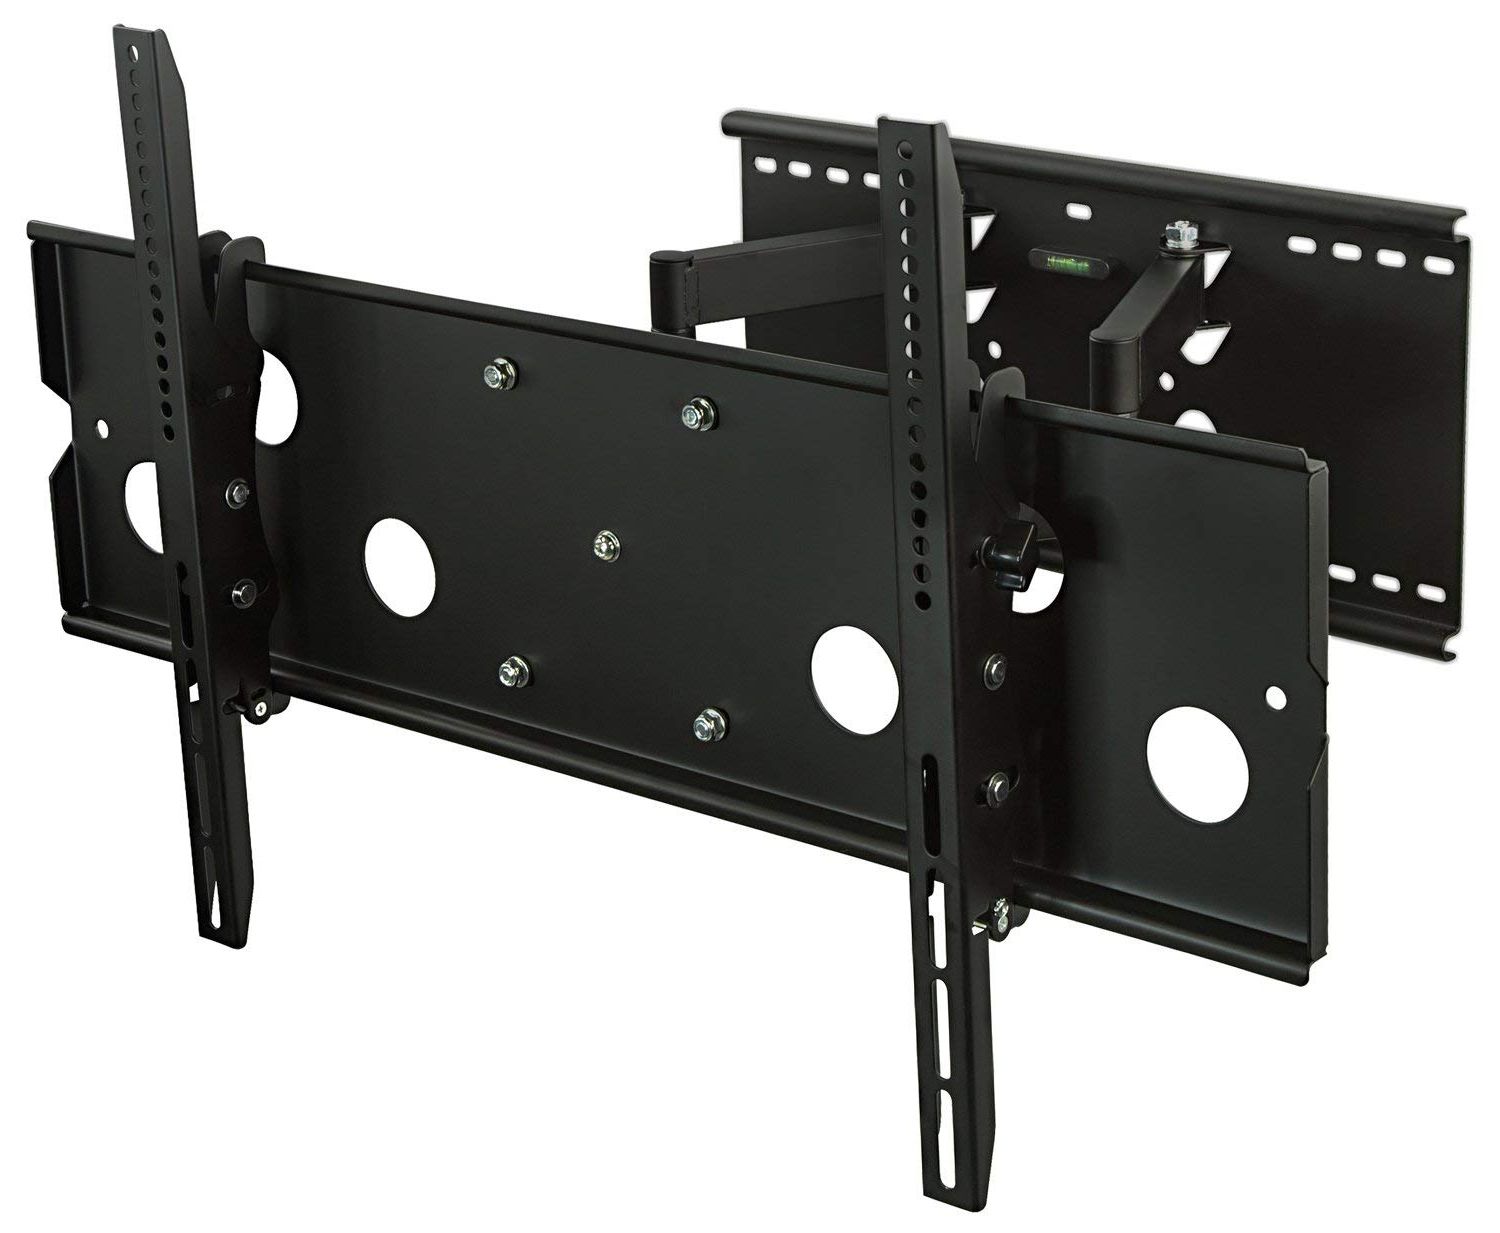 Tilted Wall Mount For Tv Intended For Favorite Amazon: Mount It! Mi 310l Full Motion Tv Wall Mount Bracket (Photo 10 of 20)